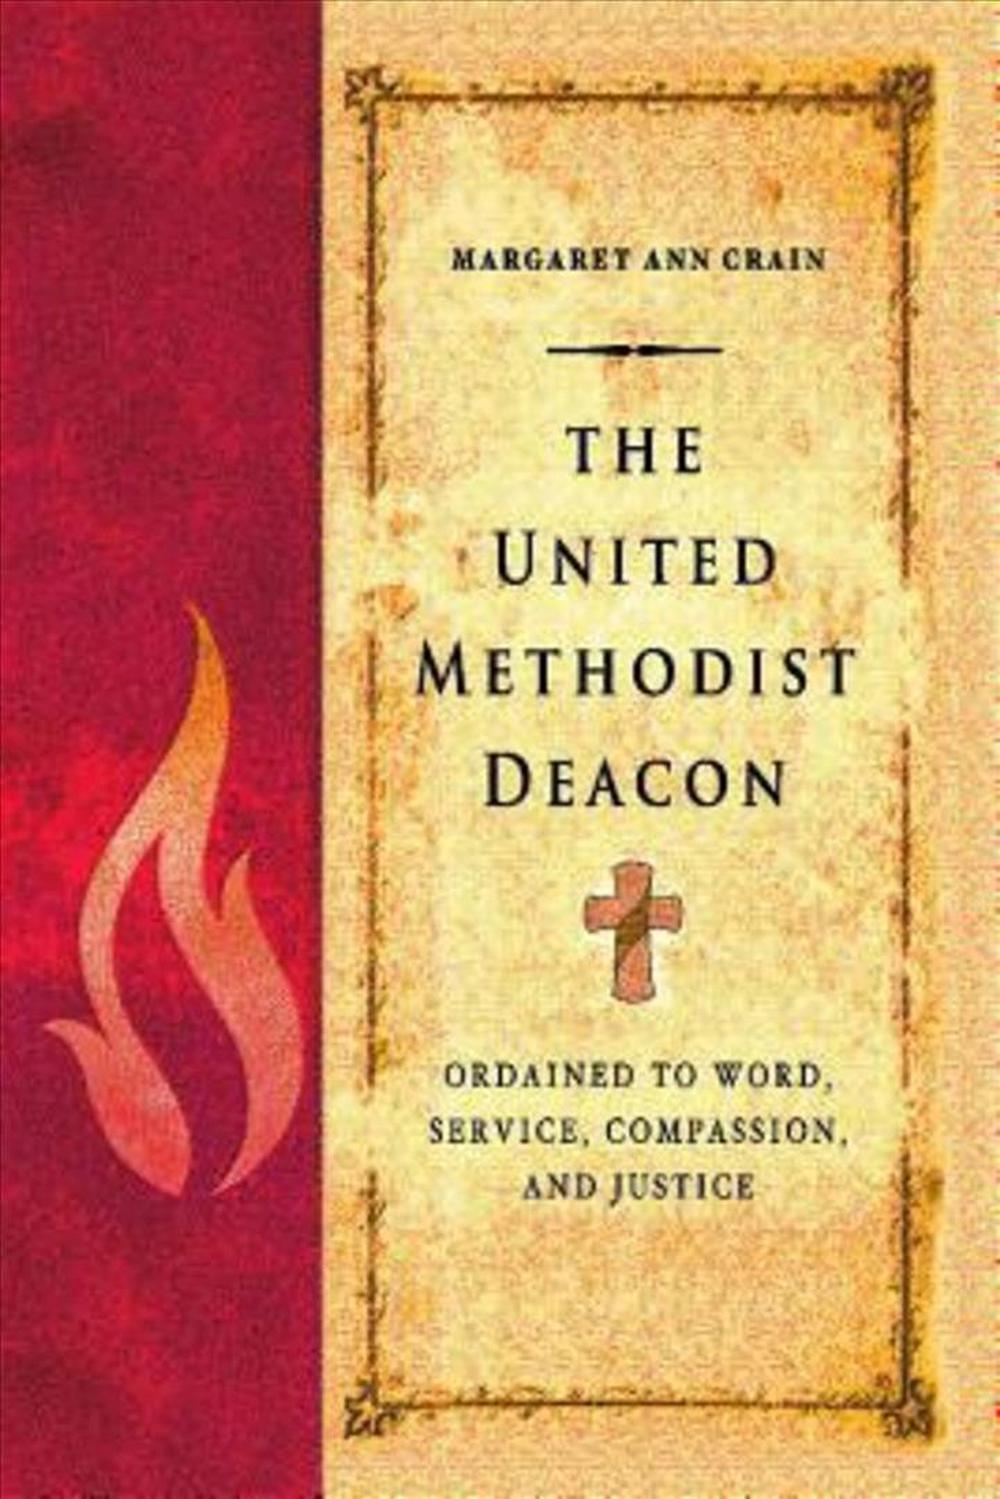 The United Methodist Deacon Ordained to Word, Service